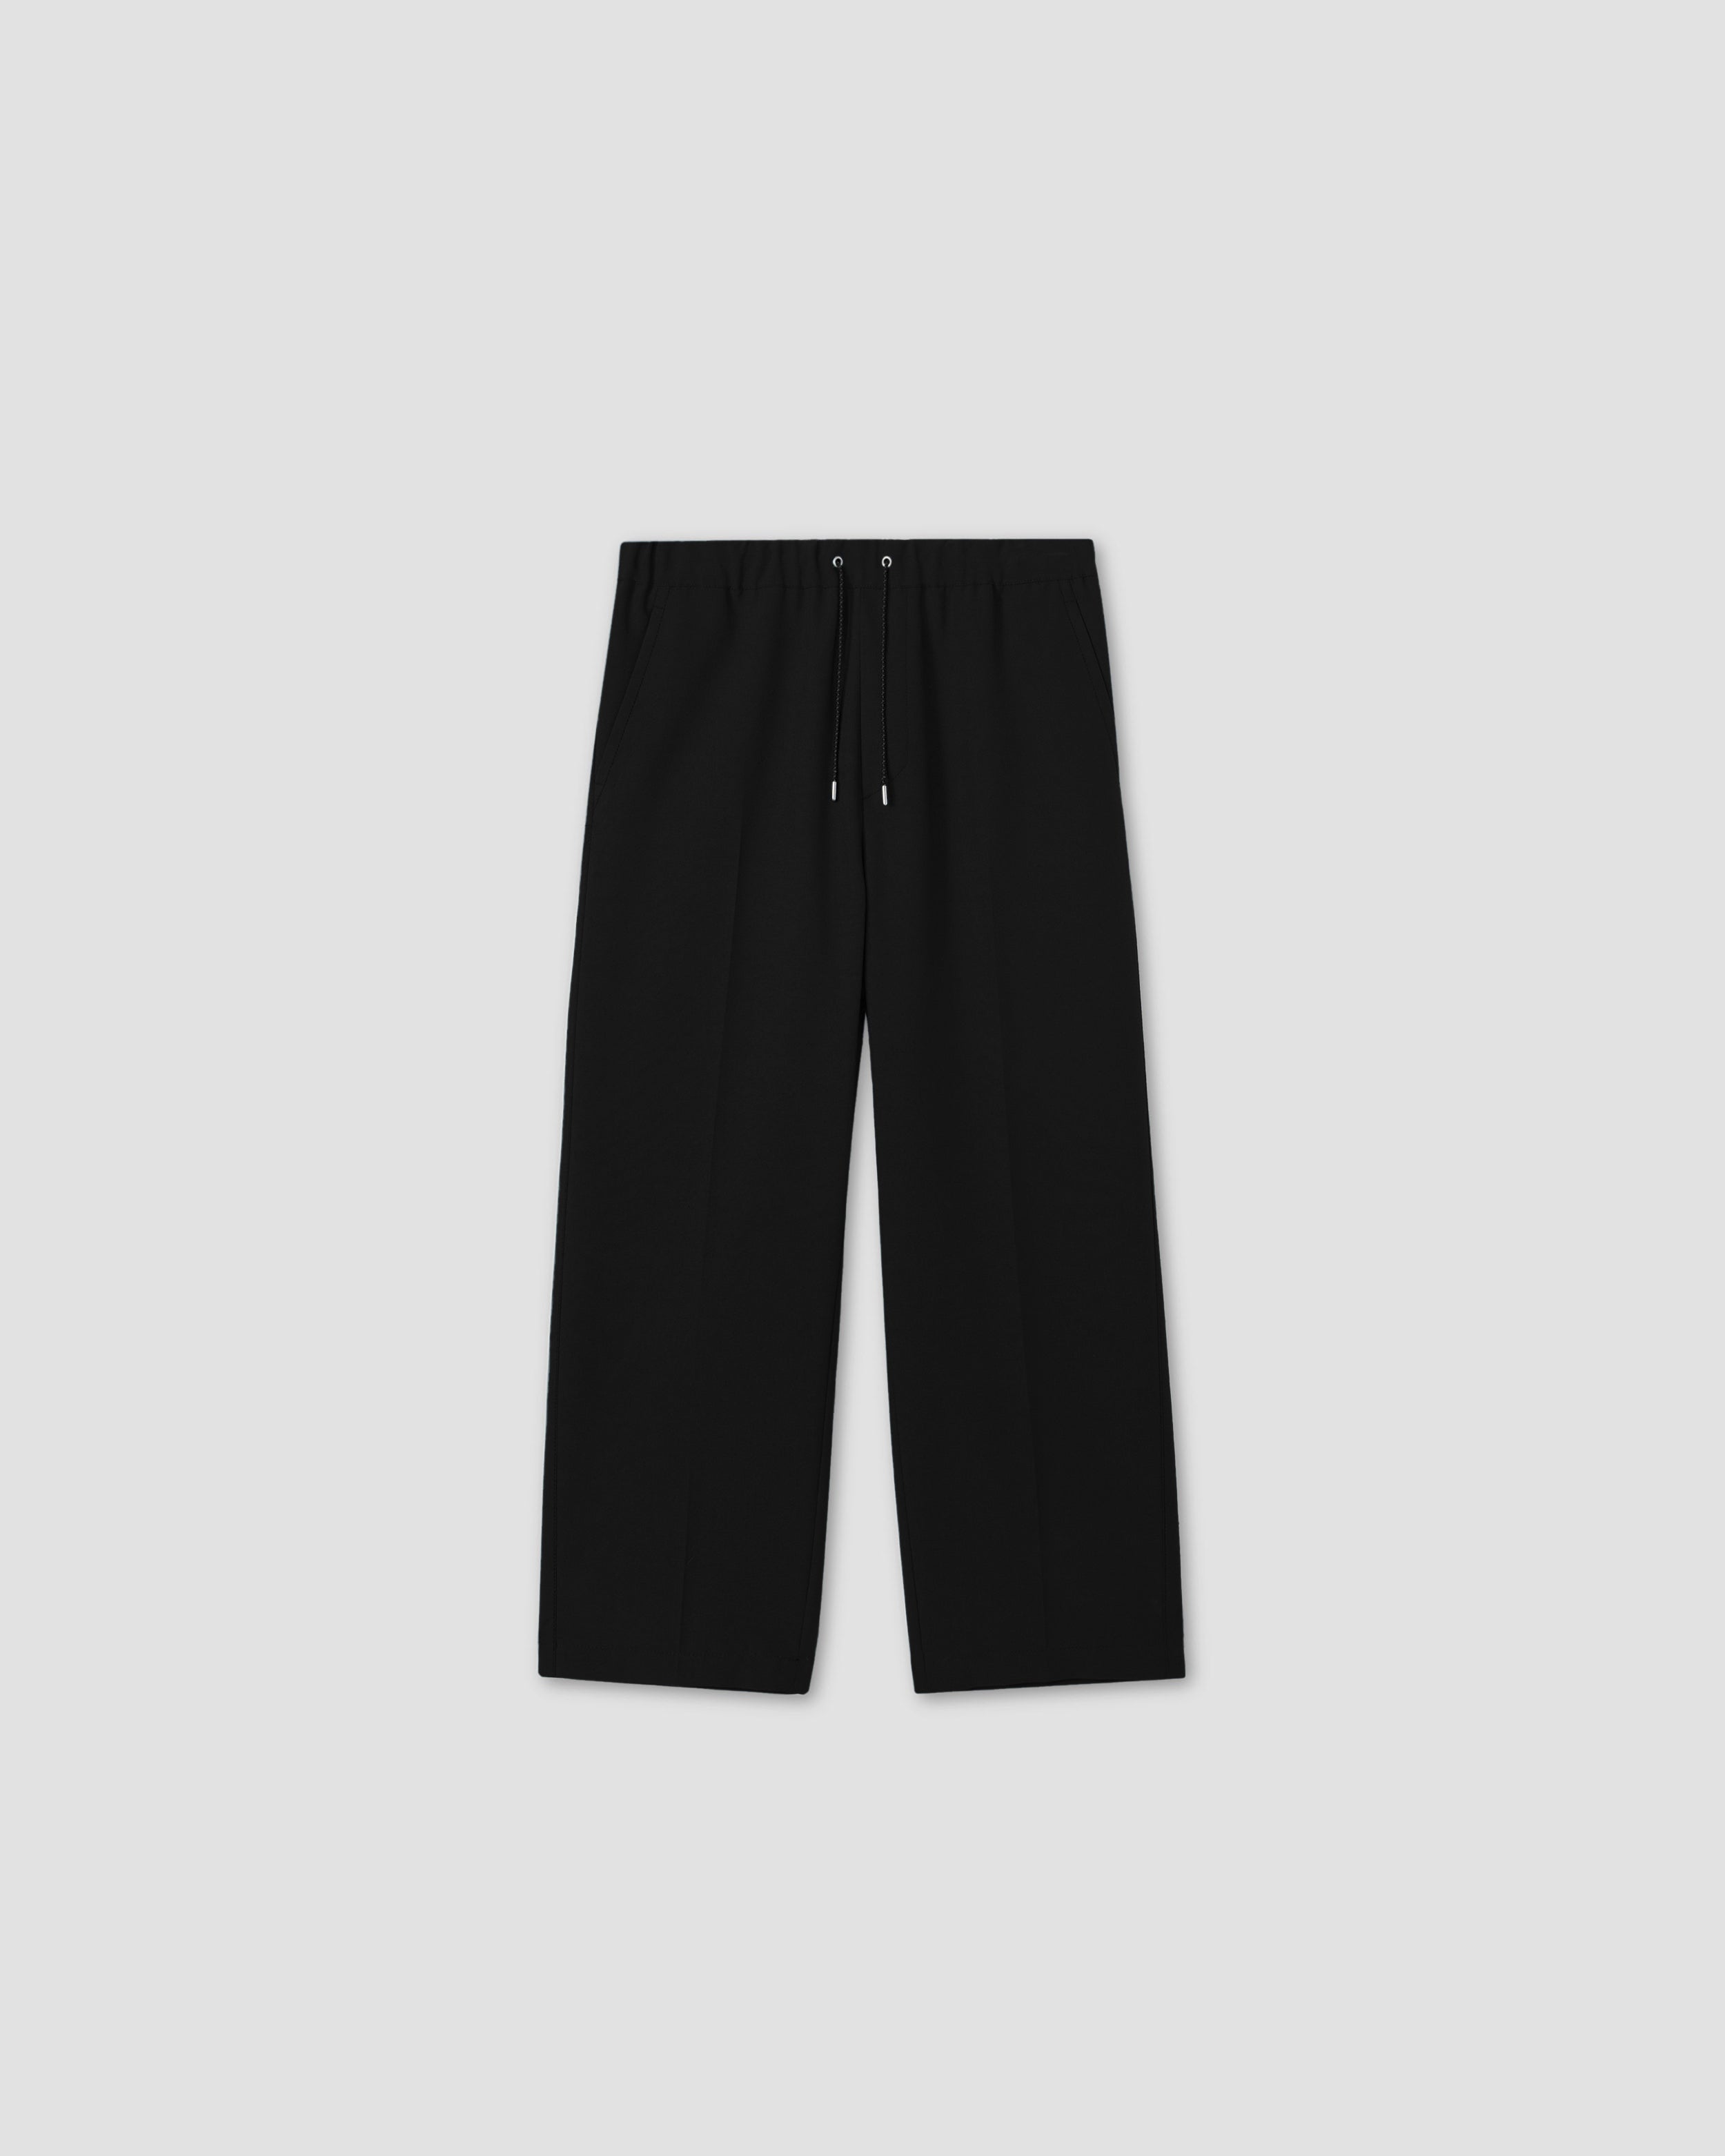 Leg To Stand On - Black Scuba Trousers – DLSB